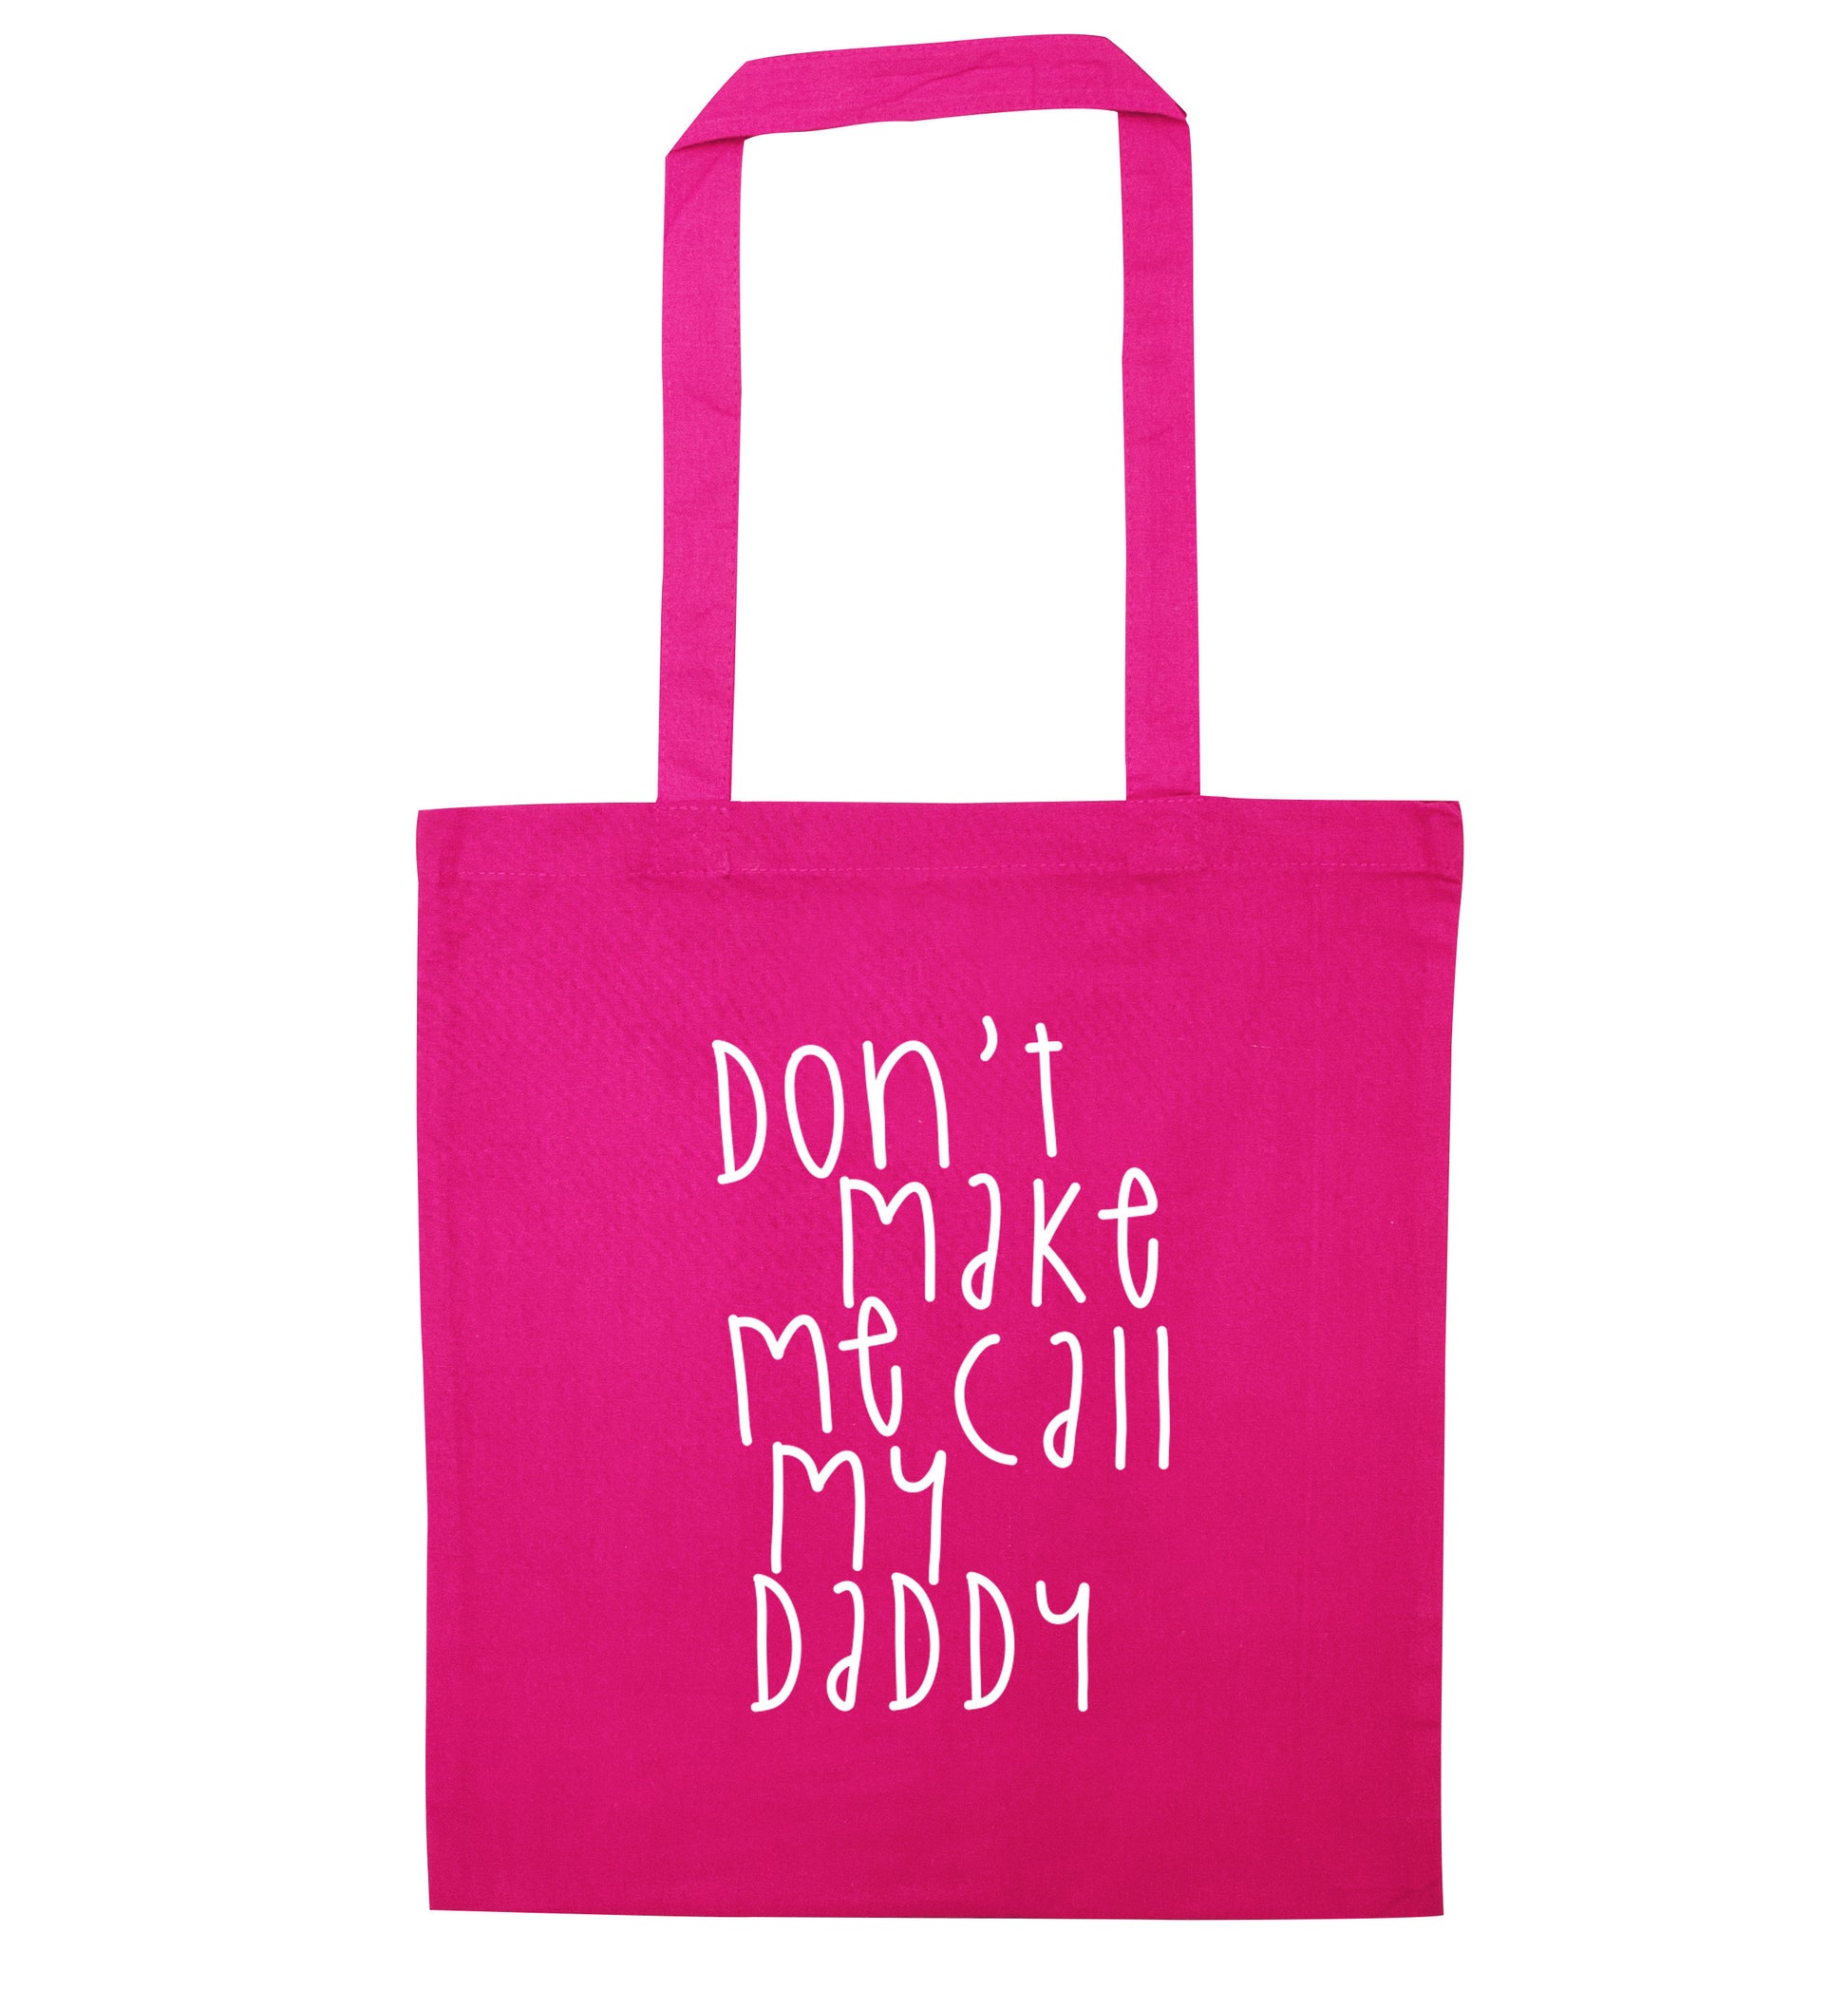 Don't make me call my daddy pink tote bag